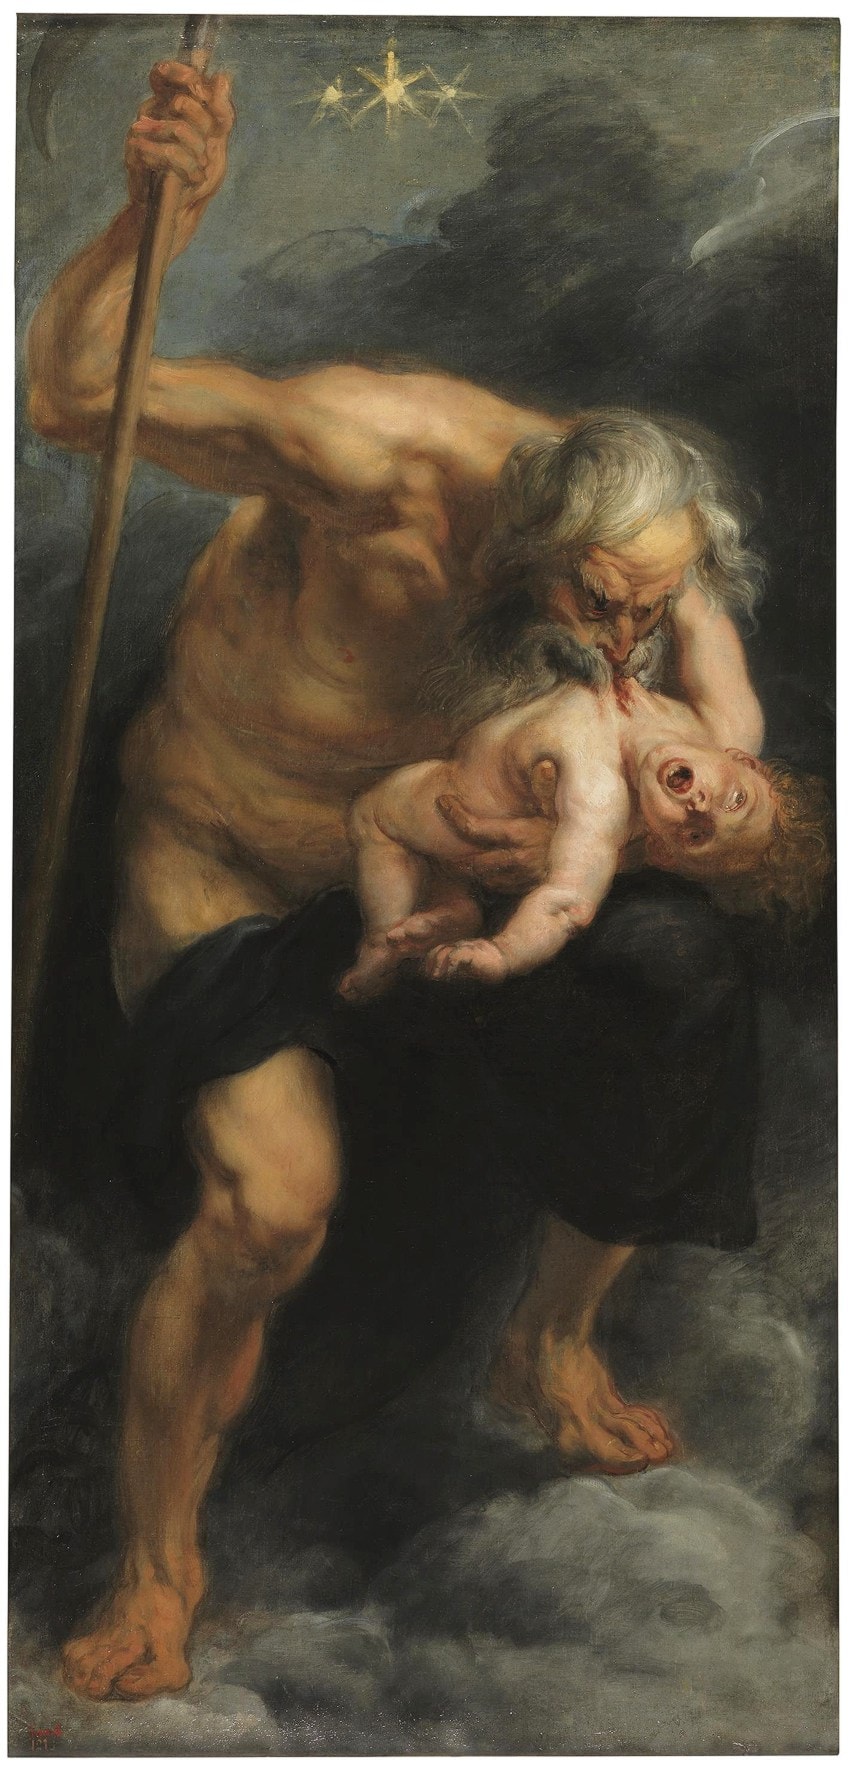 Saturn Devouring His Son by Rubens